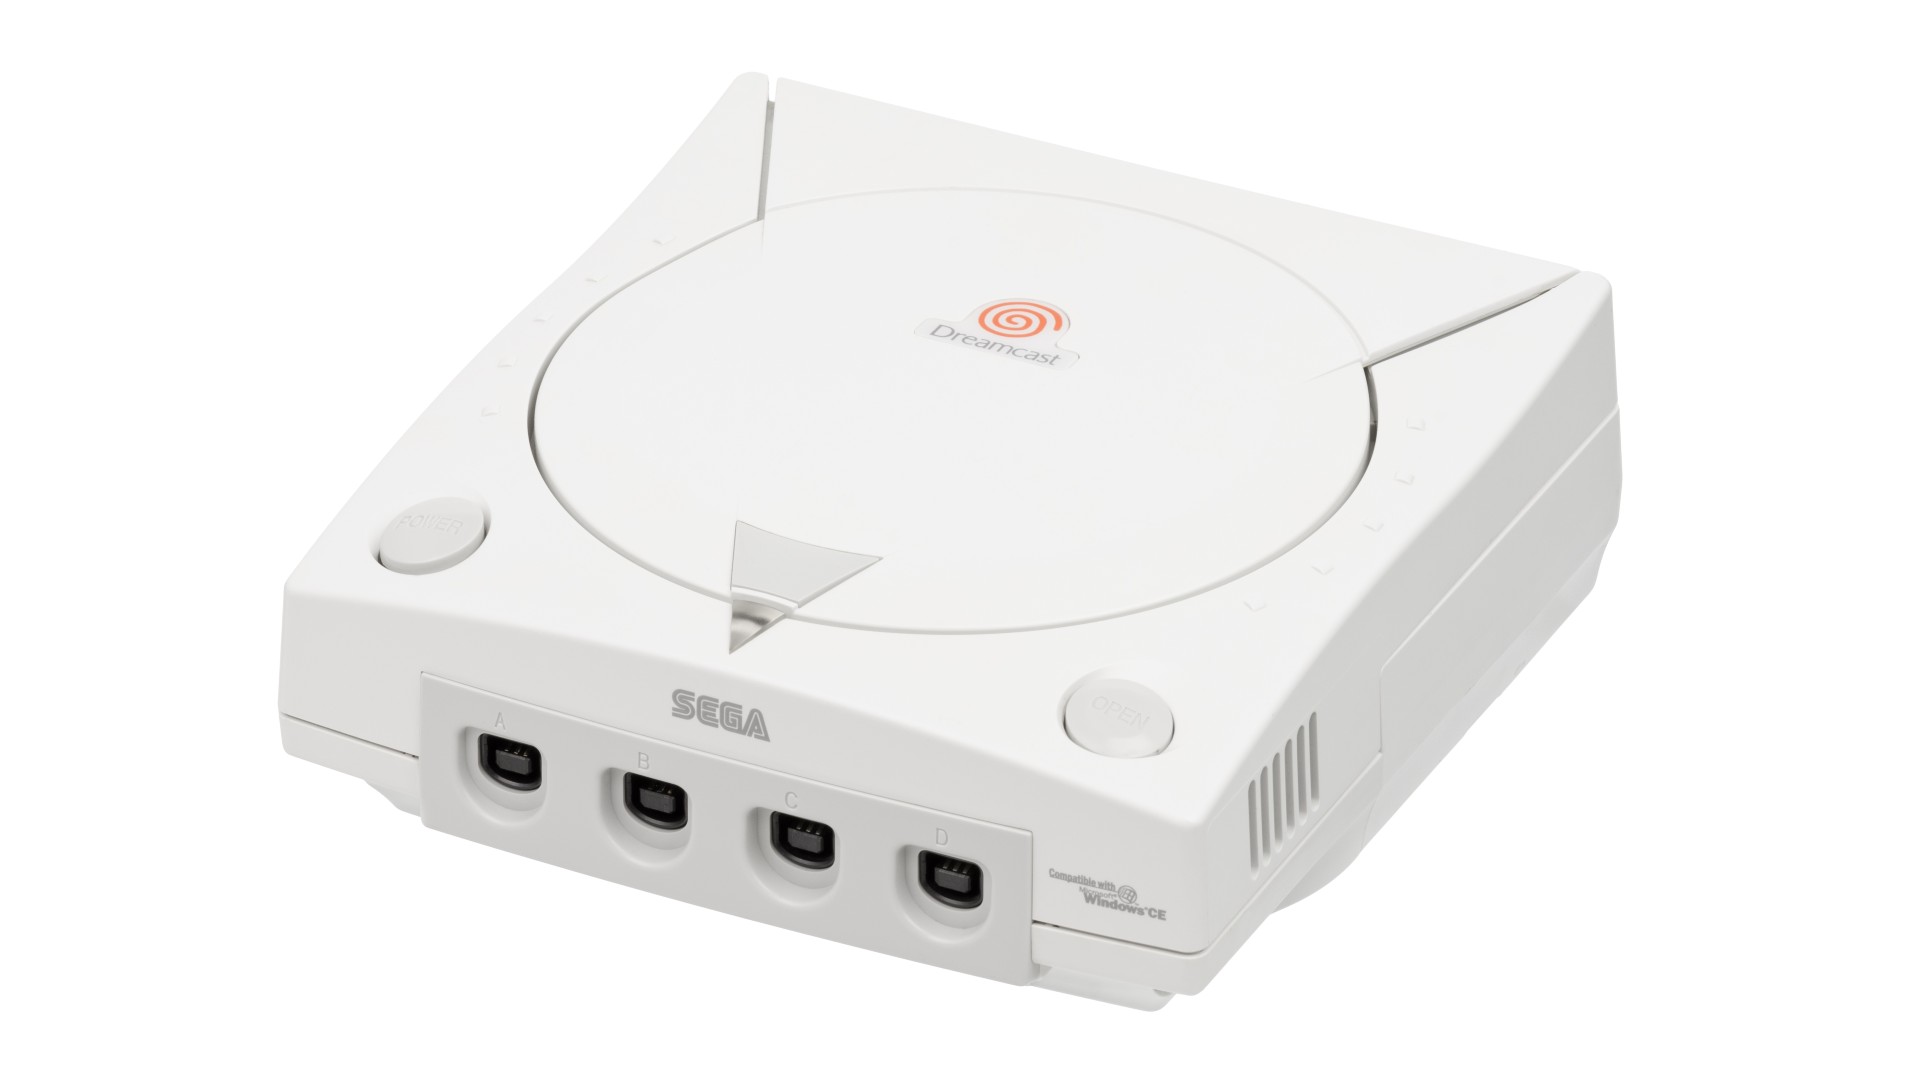 This AMD Ryzen-powered Sega Dreamcast is the perfect mini gaming PC